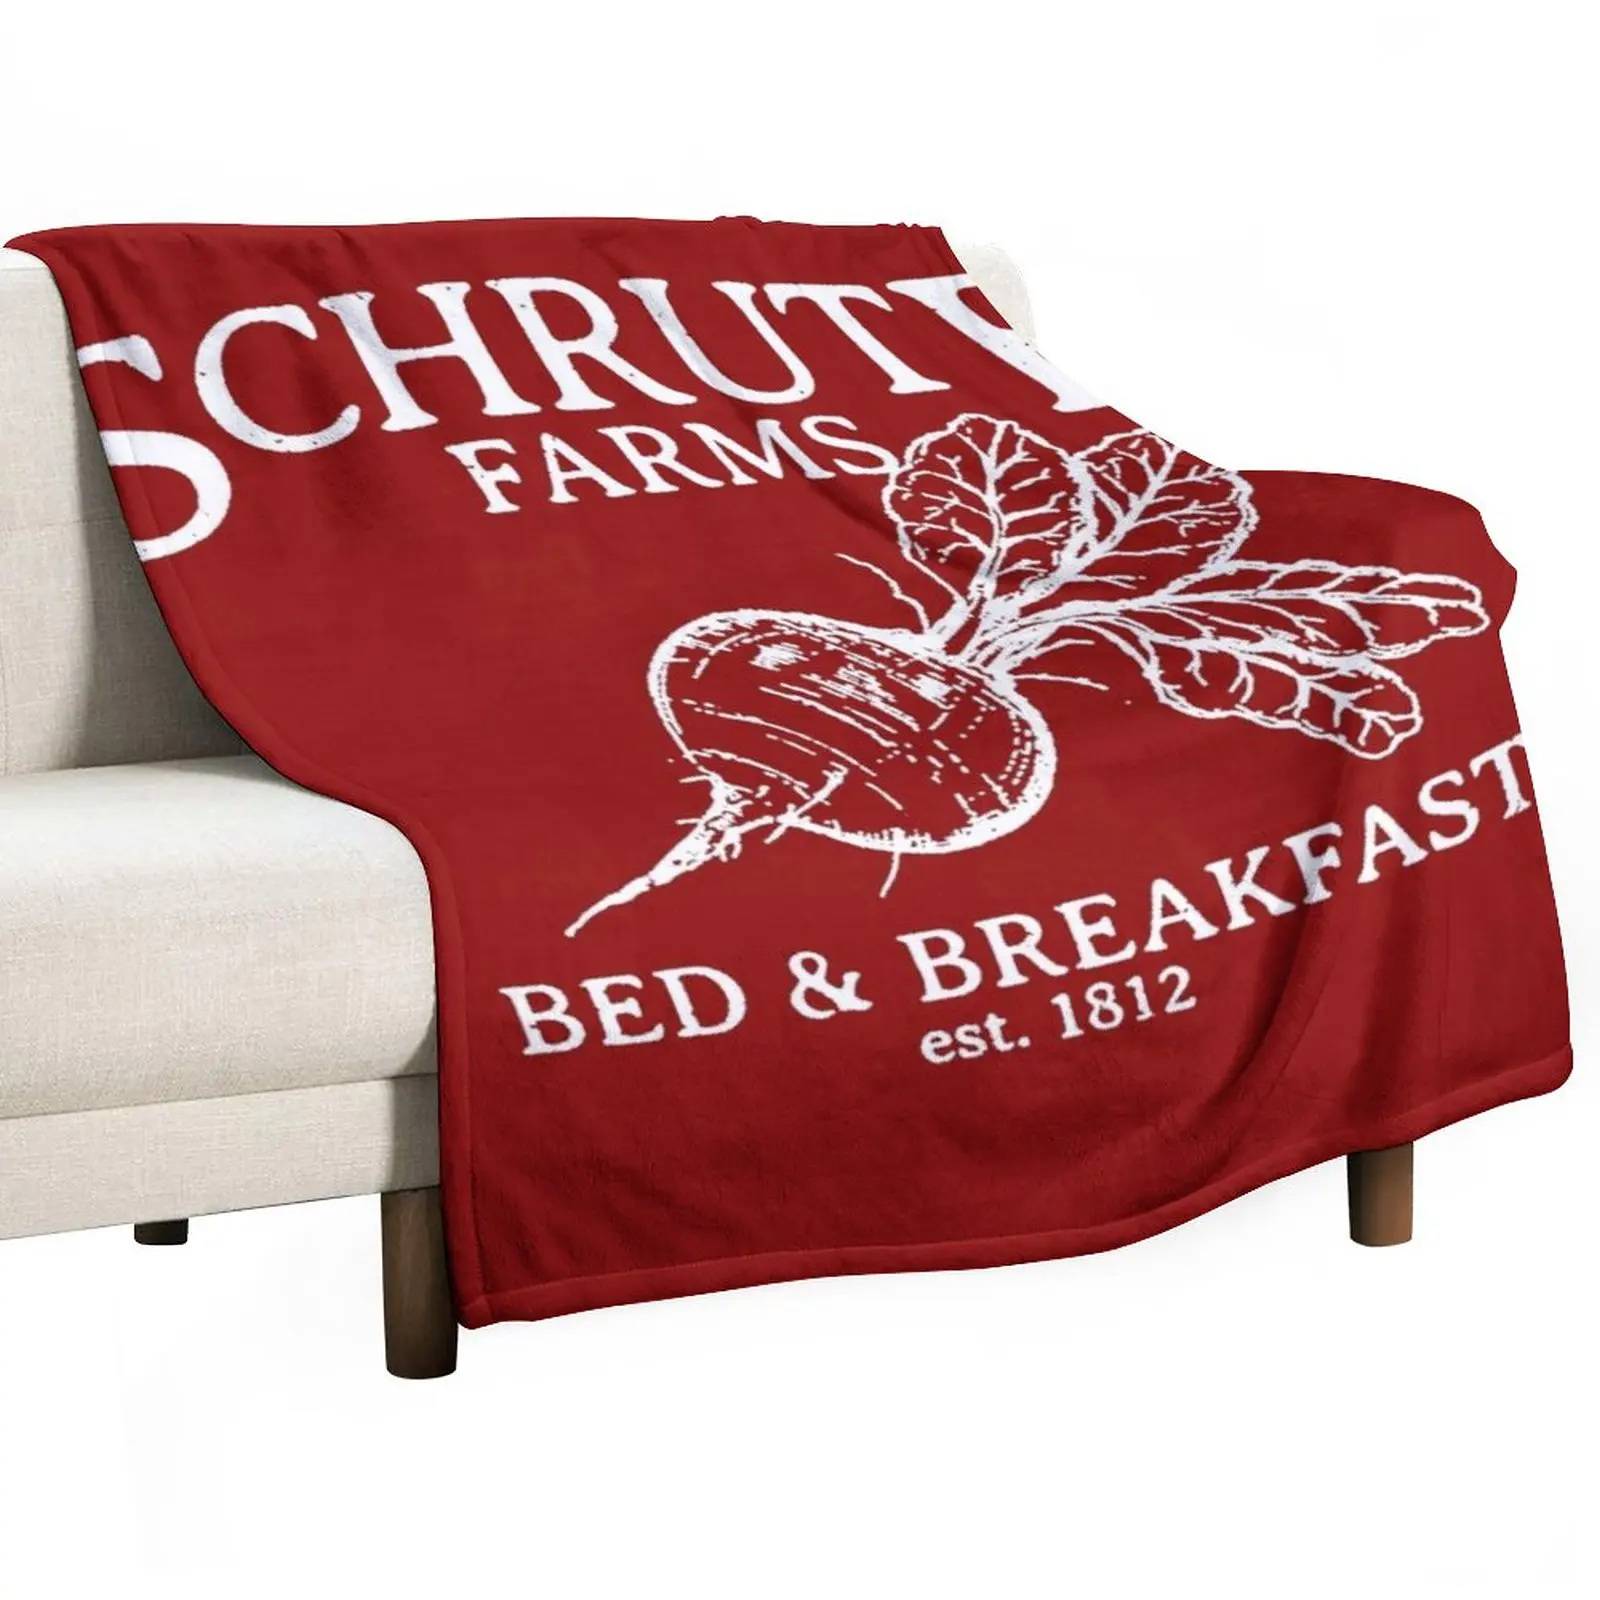 

The Office Schrute Farms Throw Blanket Plaid on the sofa Furry Blanket Thermal Blankets For Travel